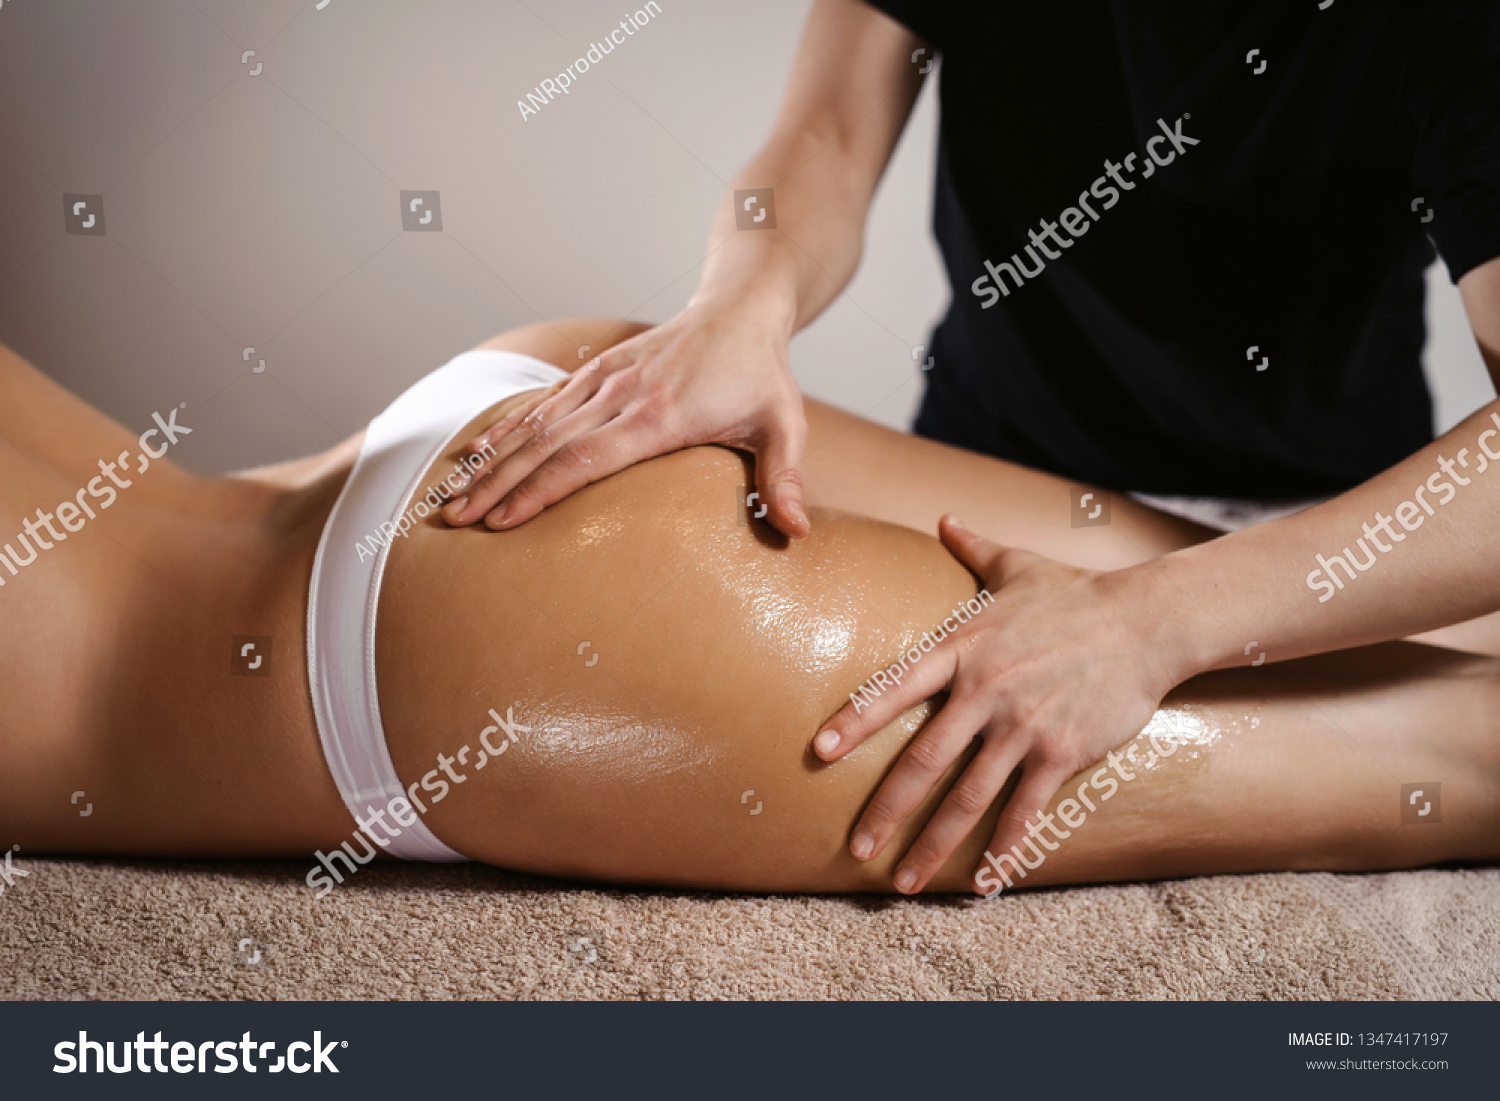 dawn renee smith recommends hot oil massage sexy pic